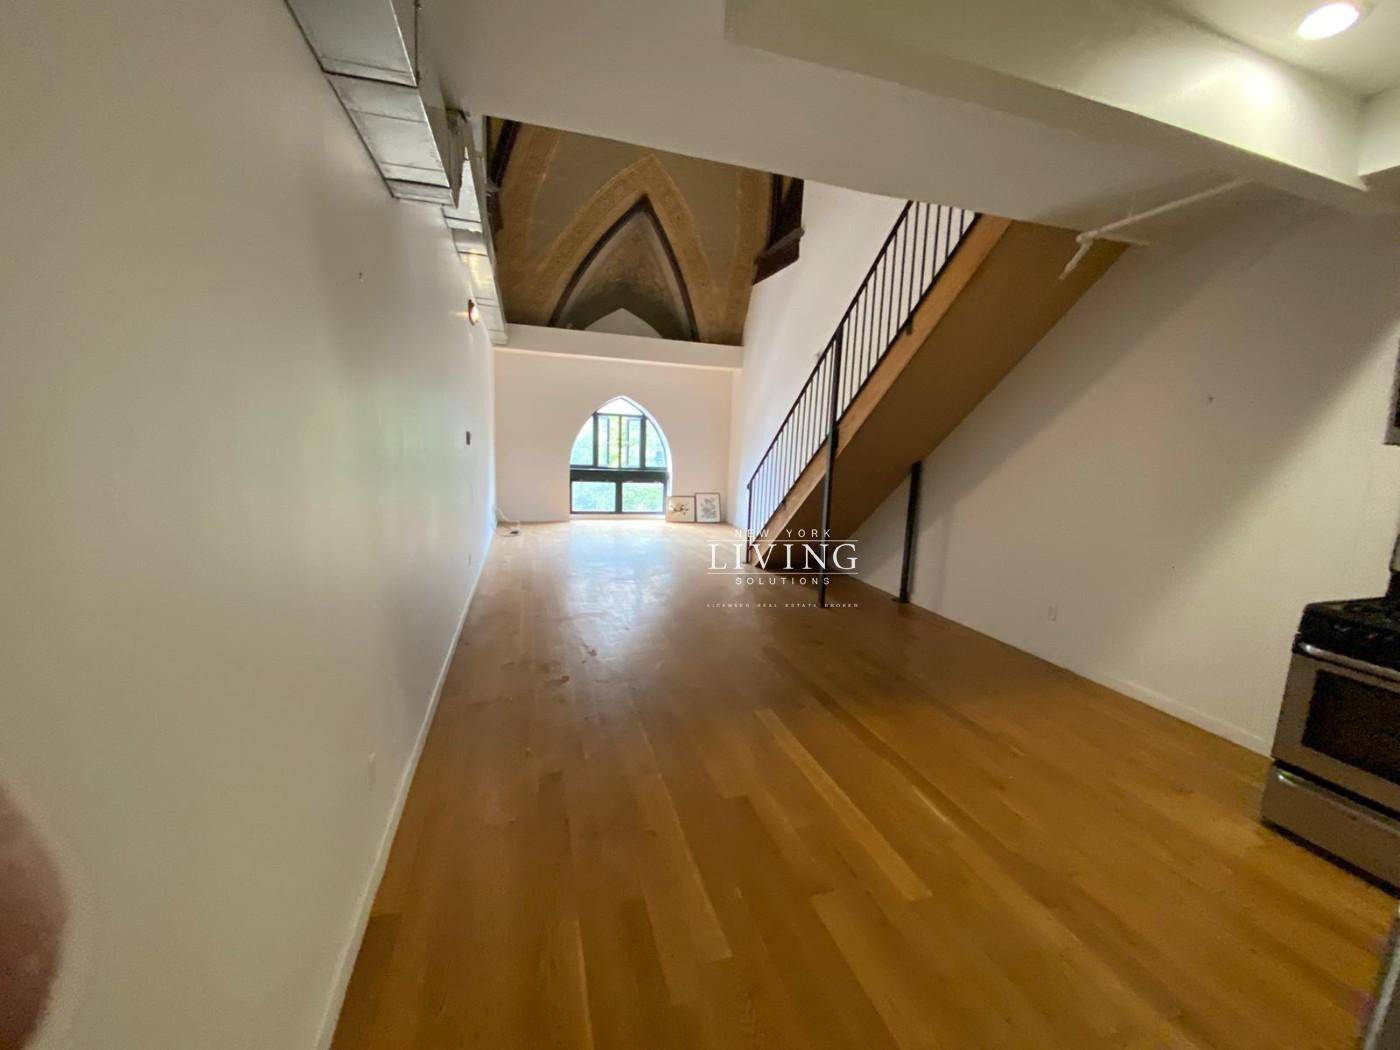 ONE OF A KIND 1 bed 1 bath DUPLEX with large private roof terrace in a stunning conversion of a 19th Century church nestled in a prime Brooklyn location.